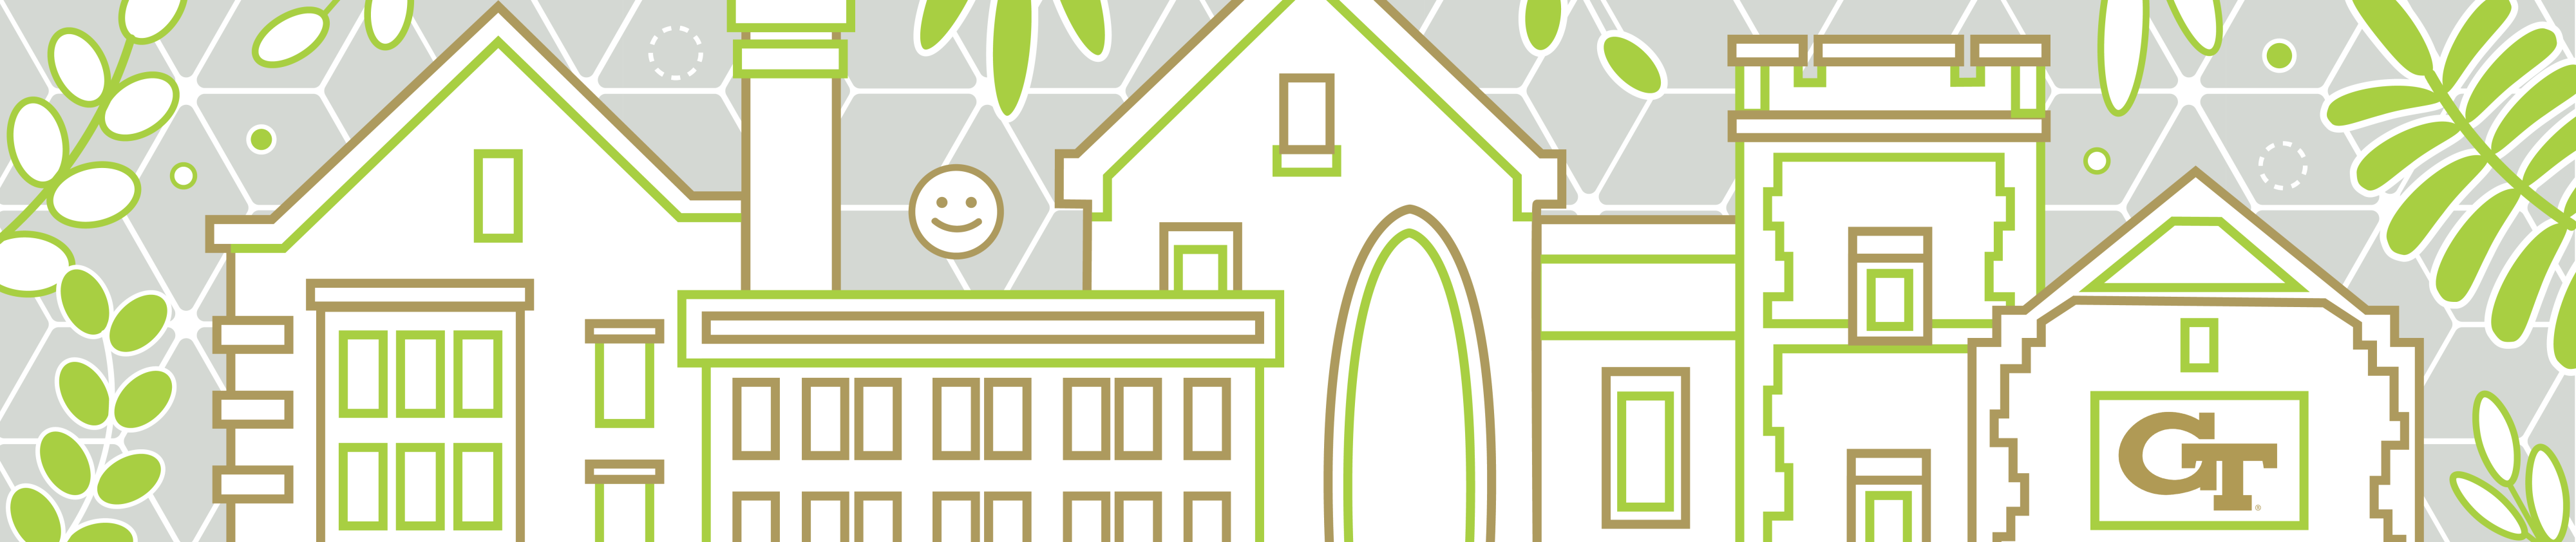 An illustration of buildings surrounded by green plants.